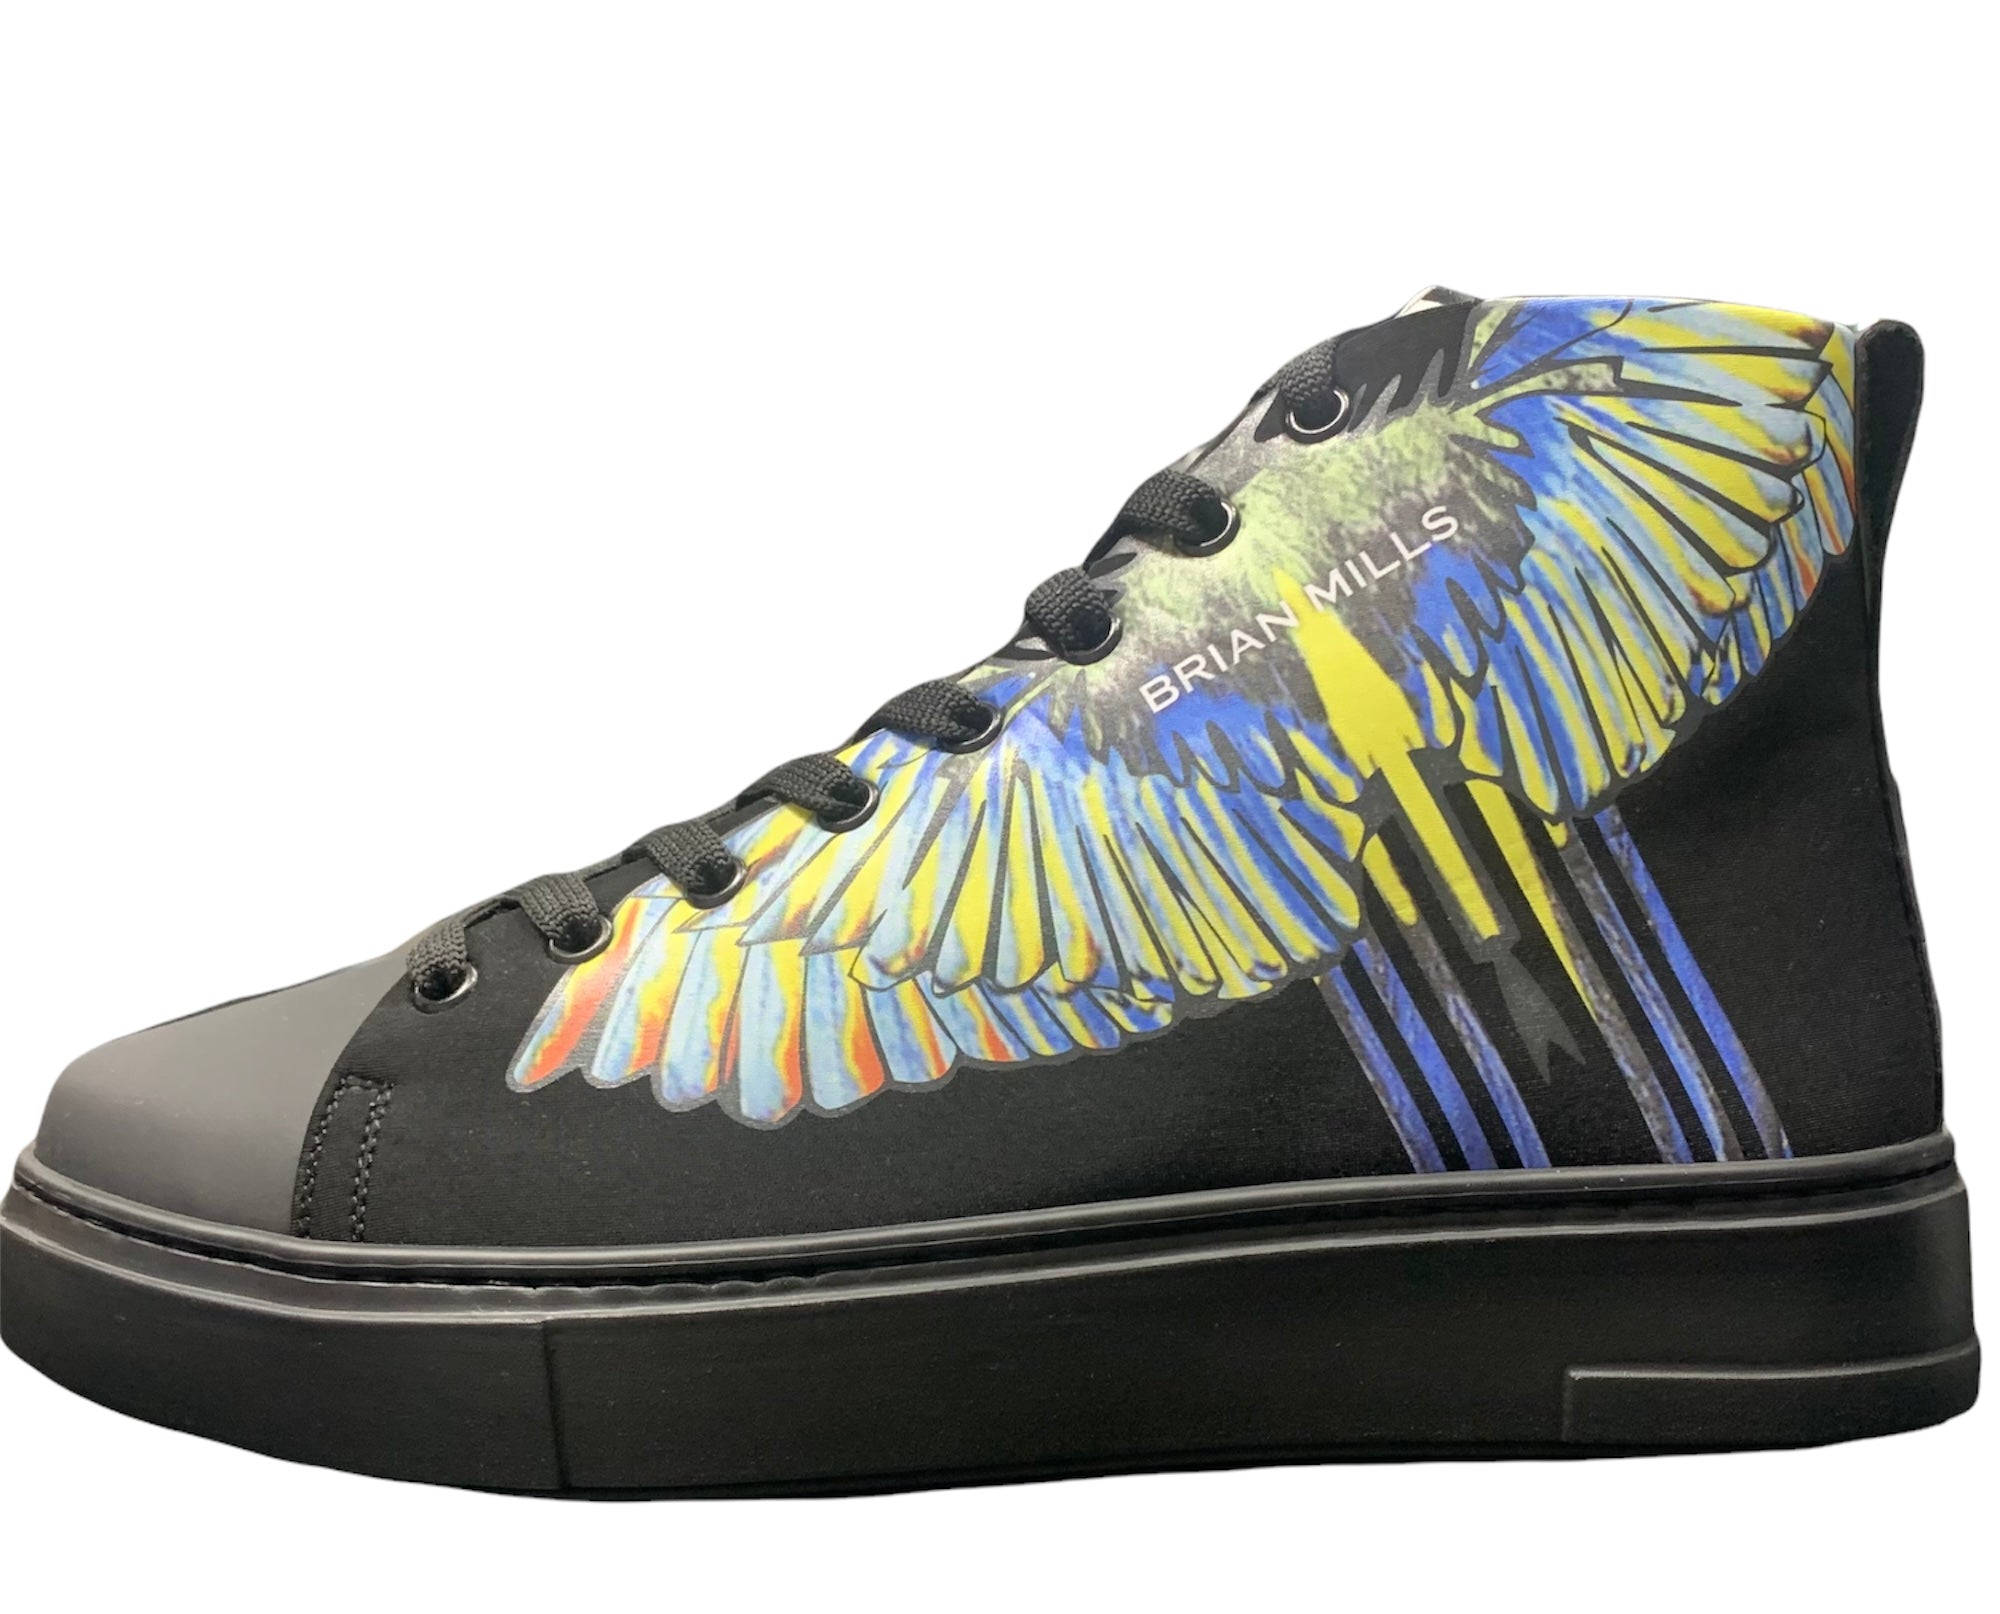 Brian Mills sneakers uomo 36547a